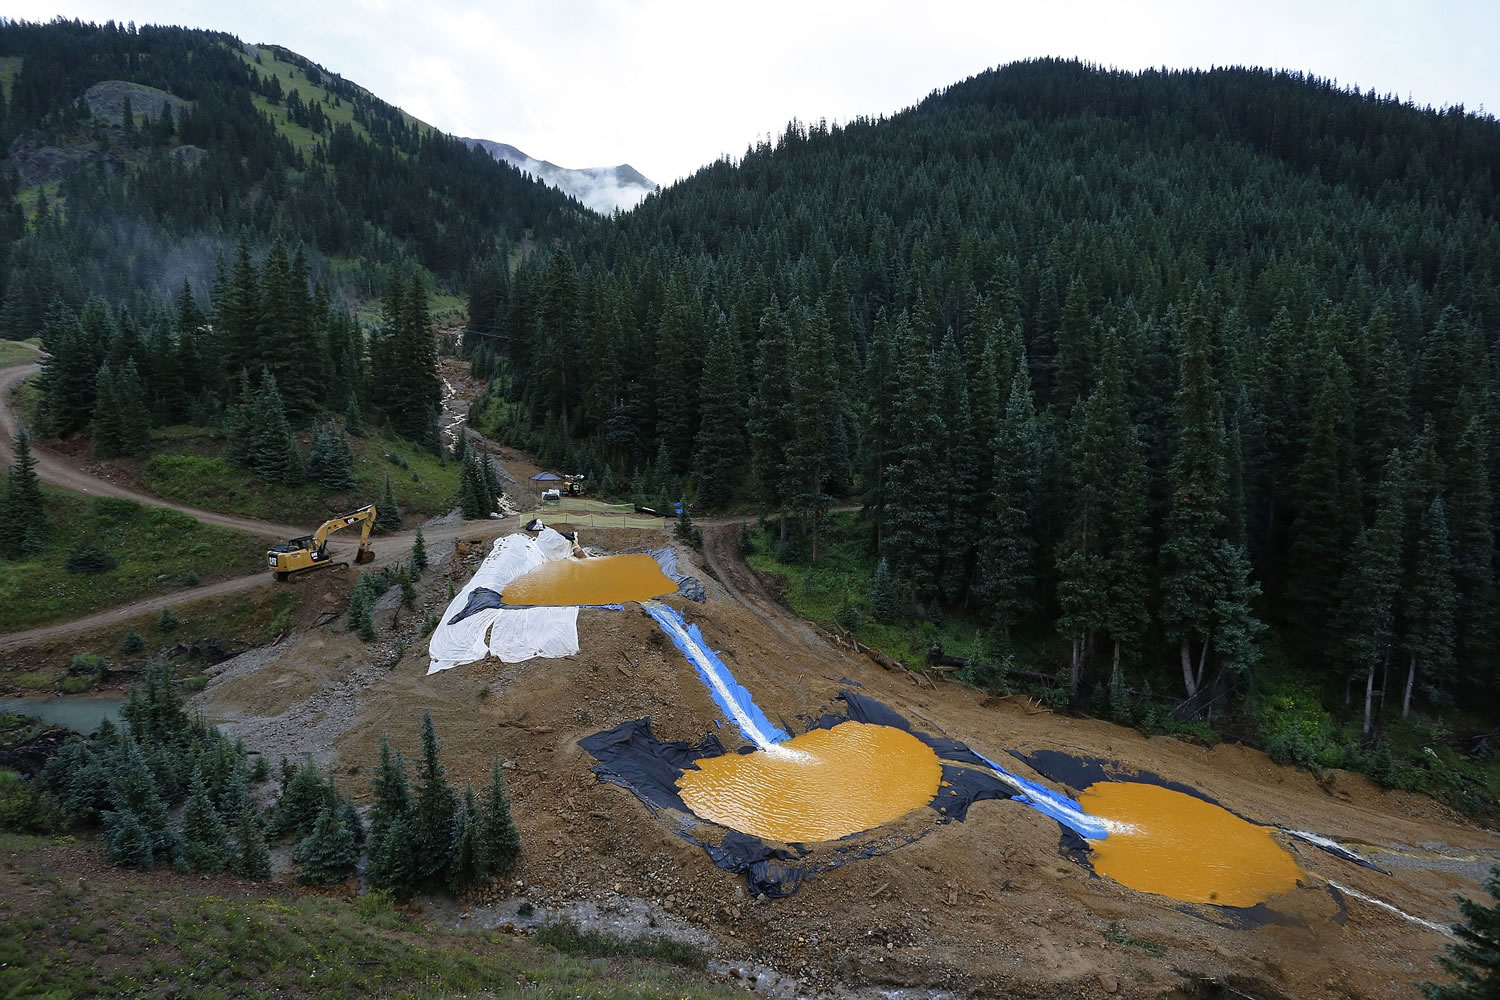 Water flows through a series of retention ponds built to contain and filter out heavy metals and chemicals from the Gold King mine chemical accident, in the spillway about 1/4 mile downstream from the mine, outside Silverton, Colo.